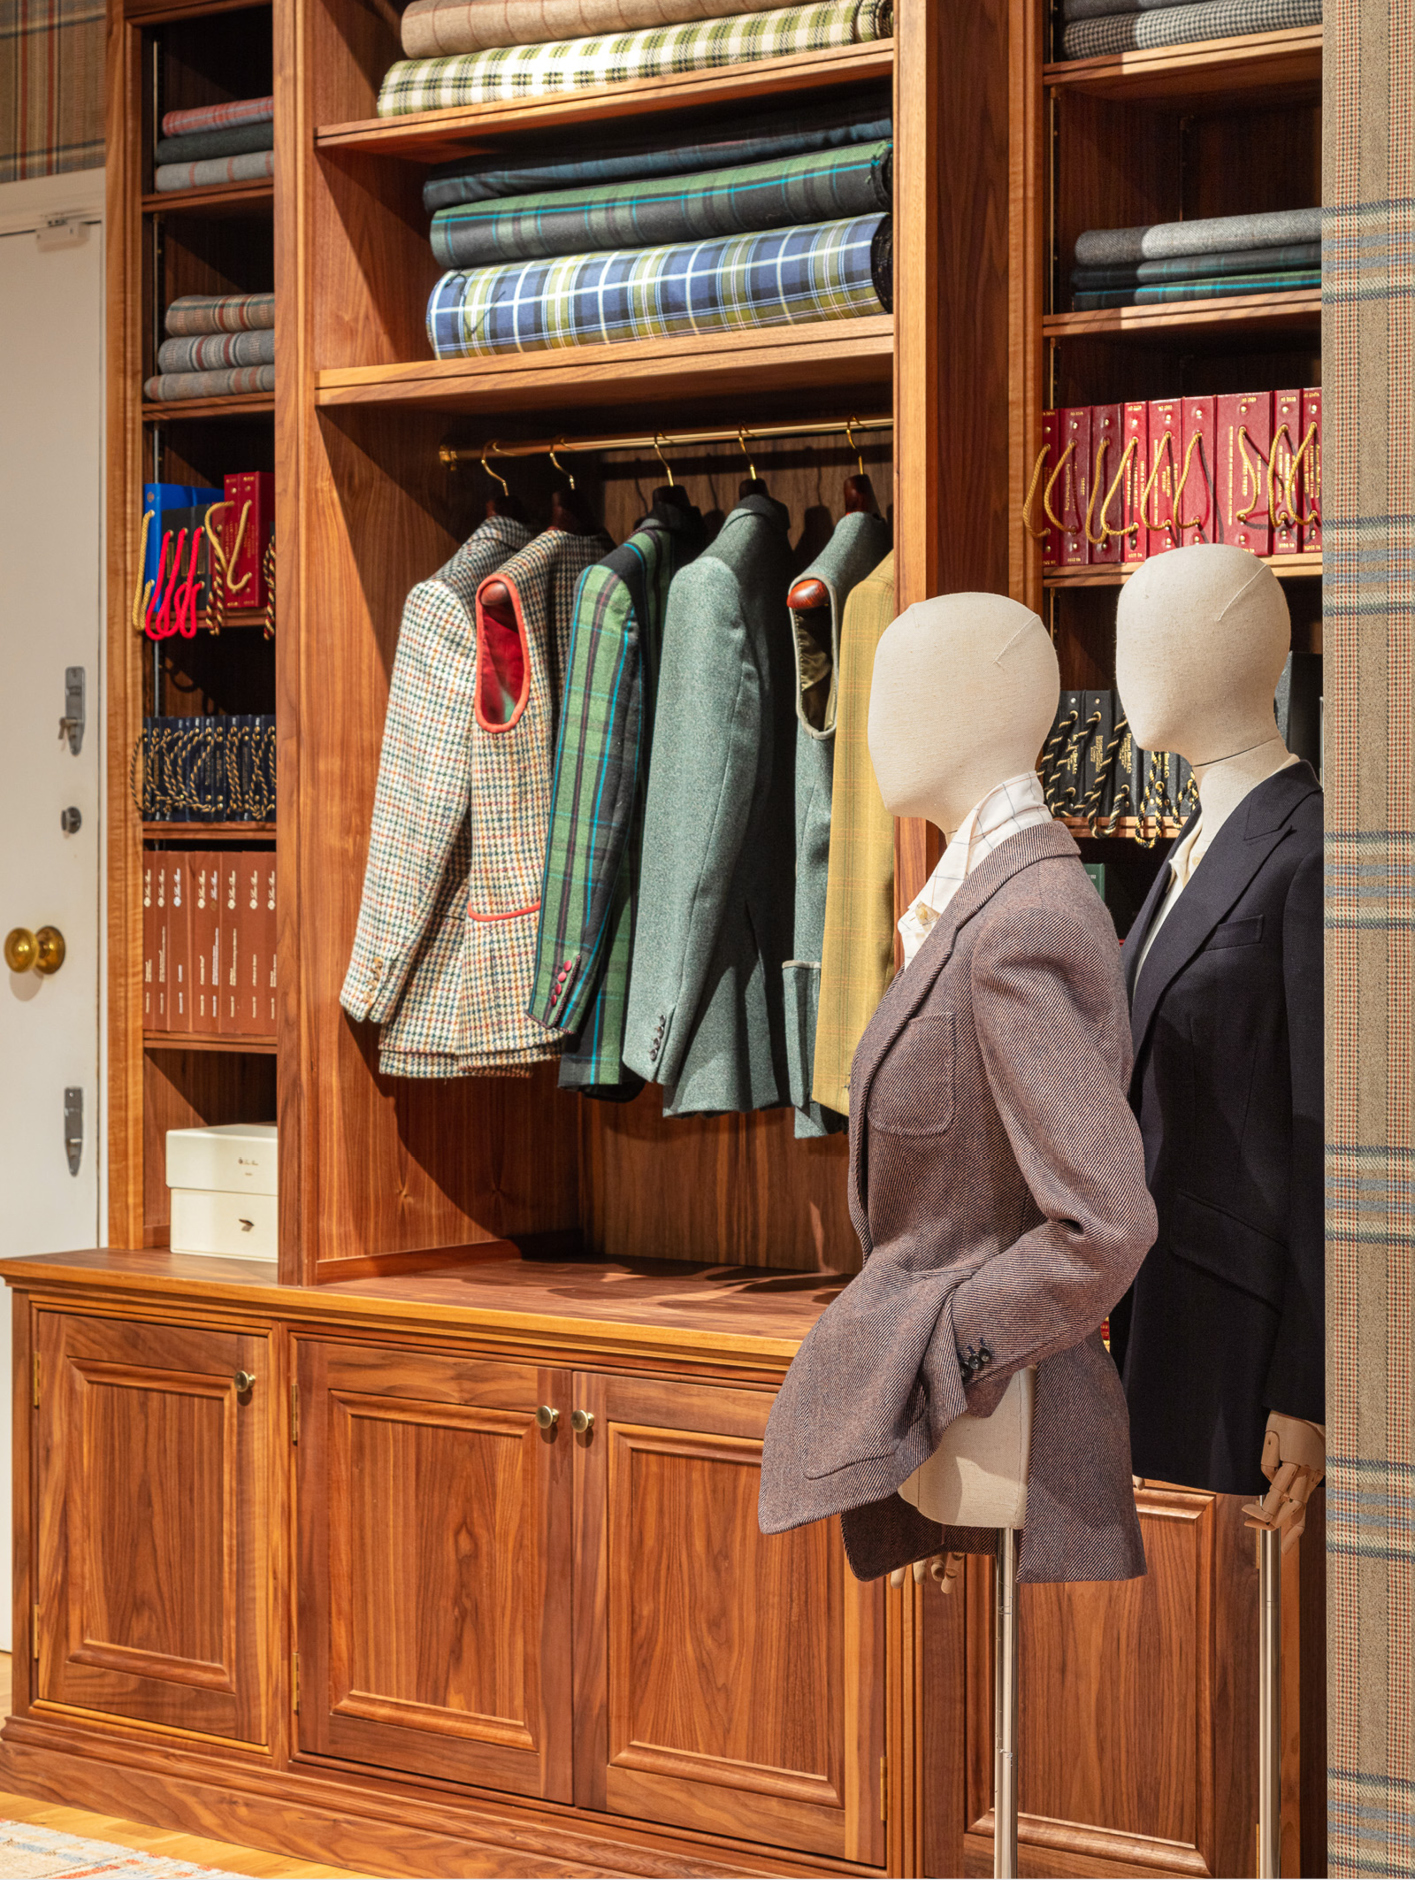 The Huntsman Club provides an excellent opportunity to take time perusing the tailor's classic English designs